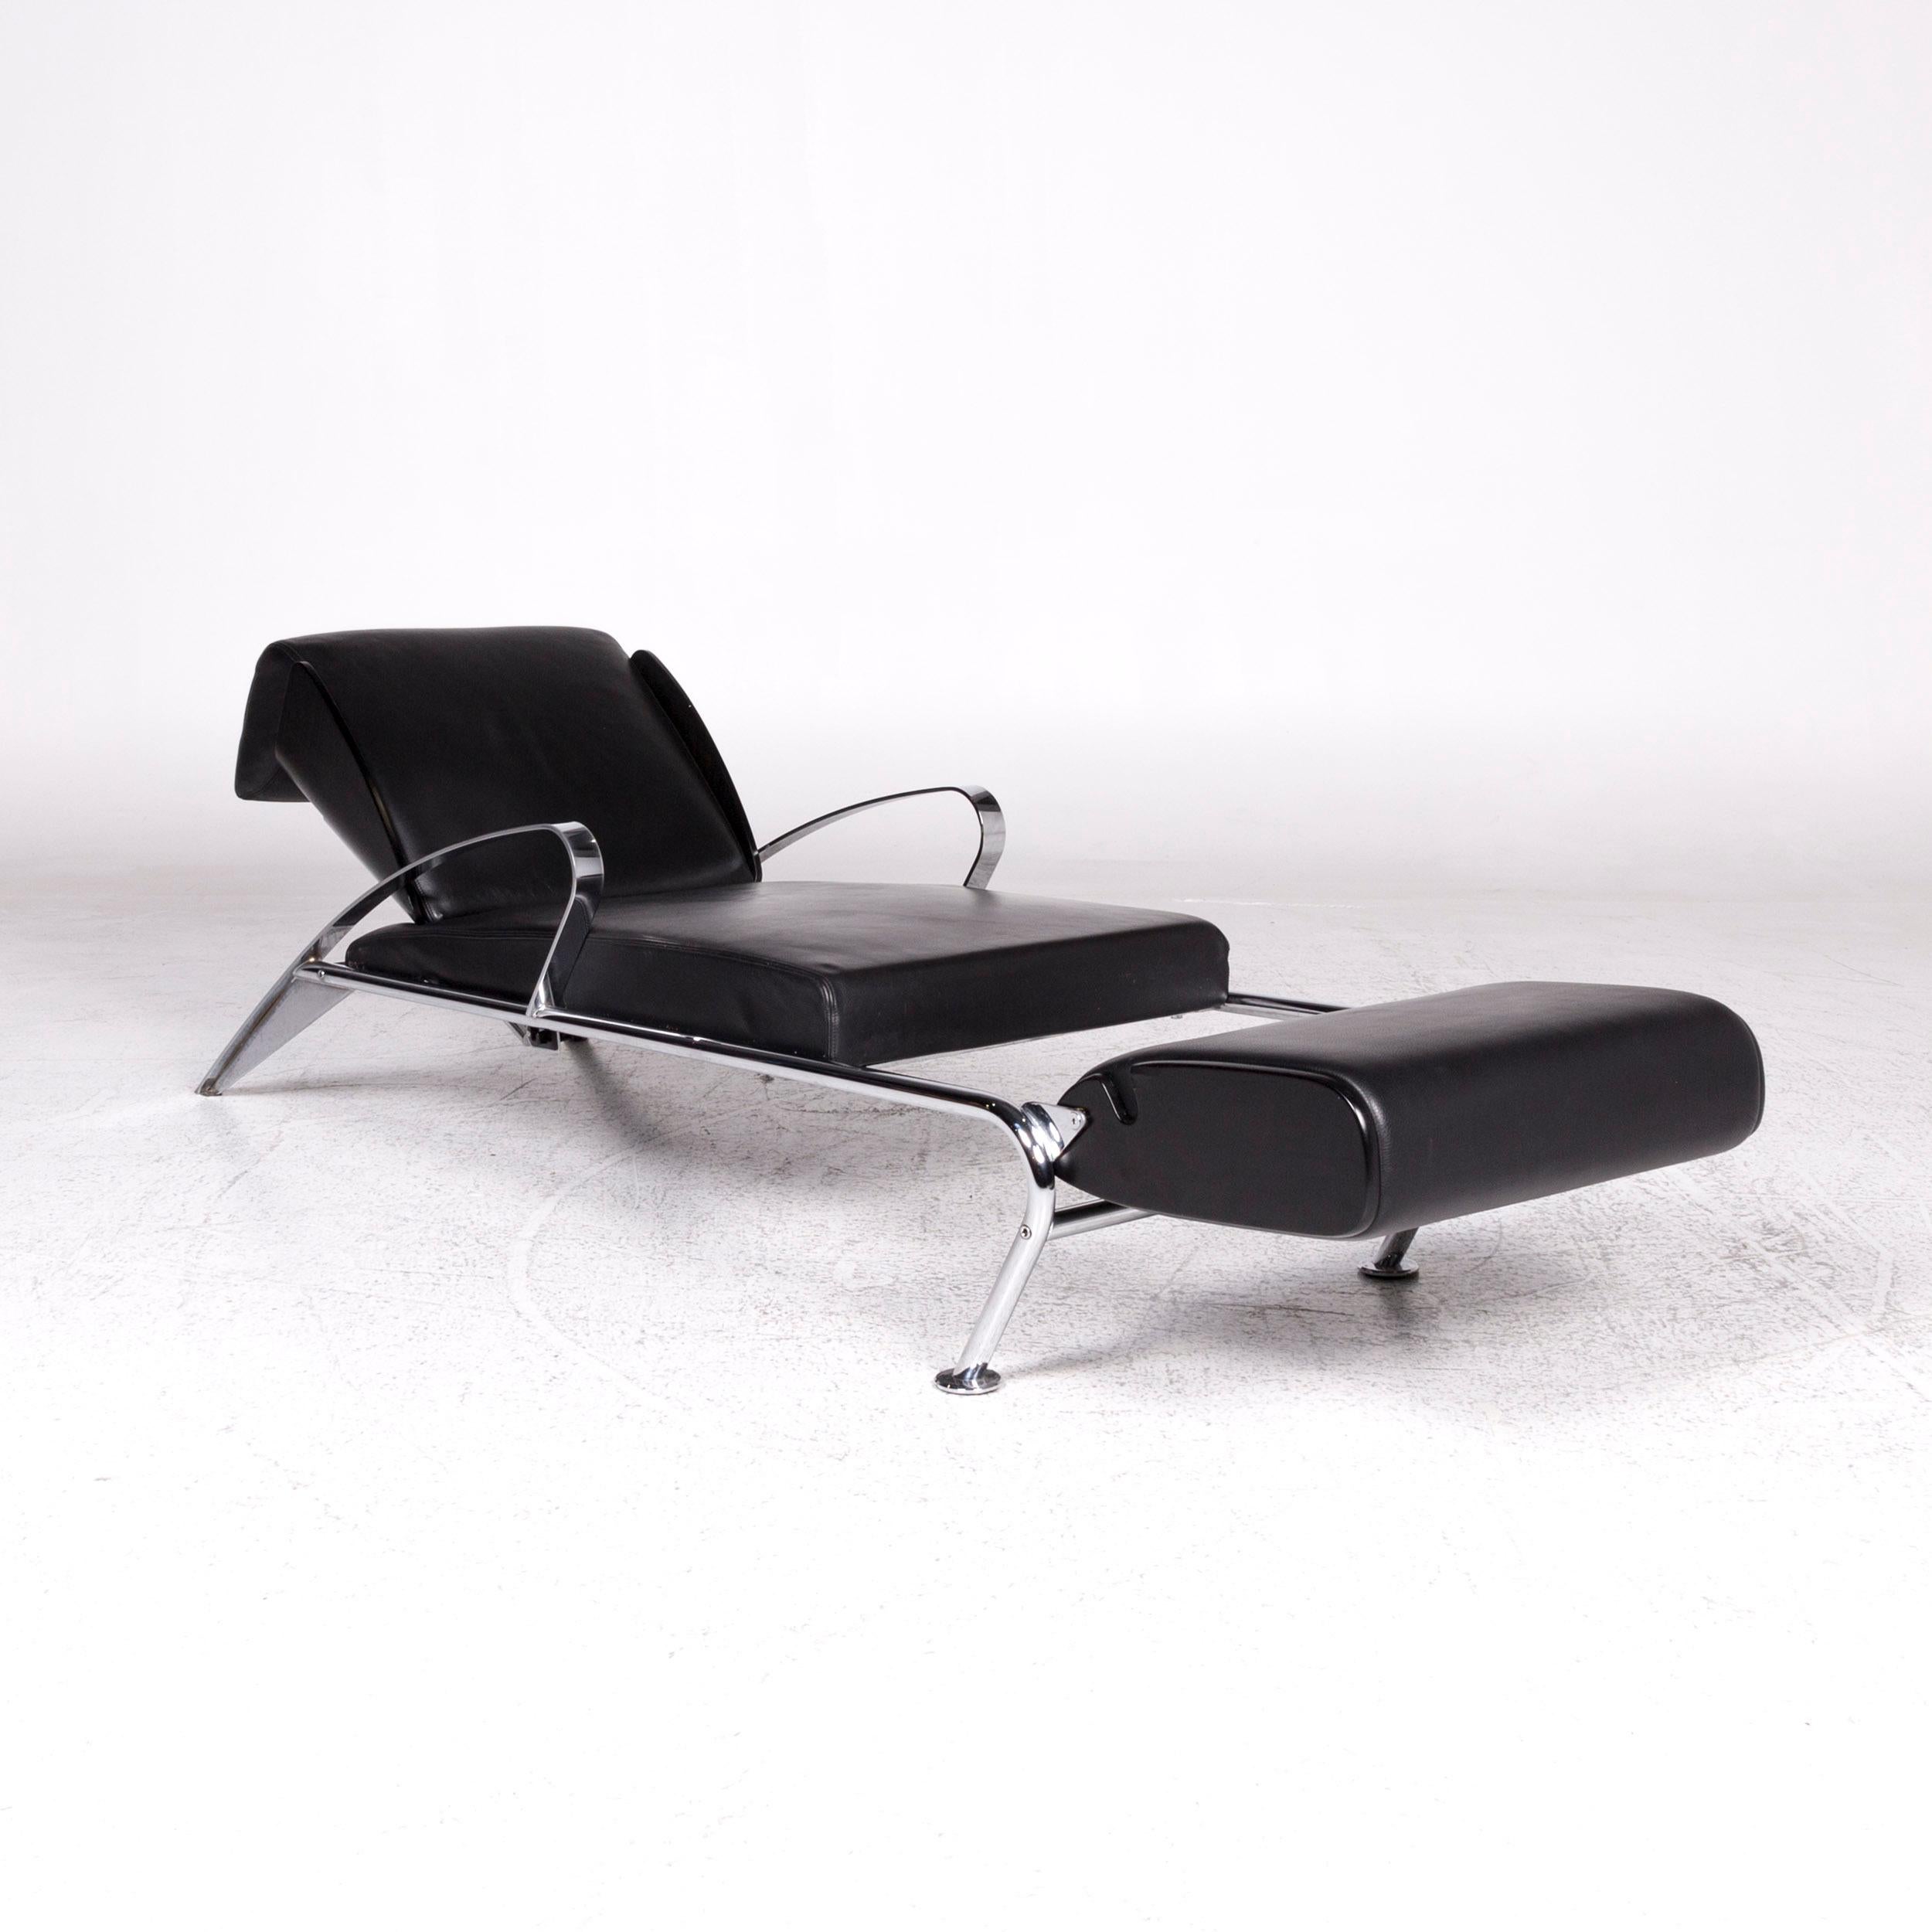 Moroso Massimo Leather Lounger Black Relax function In Excellent Condition For Sale In Cologne, DE